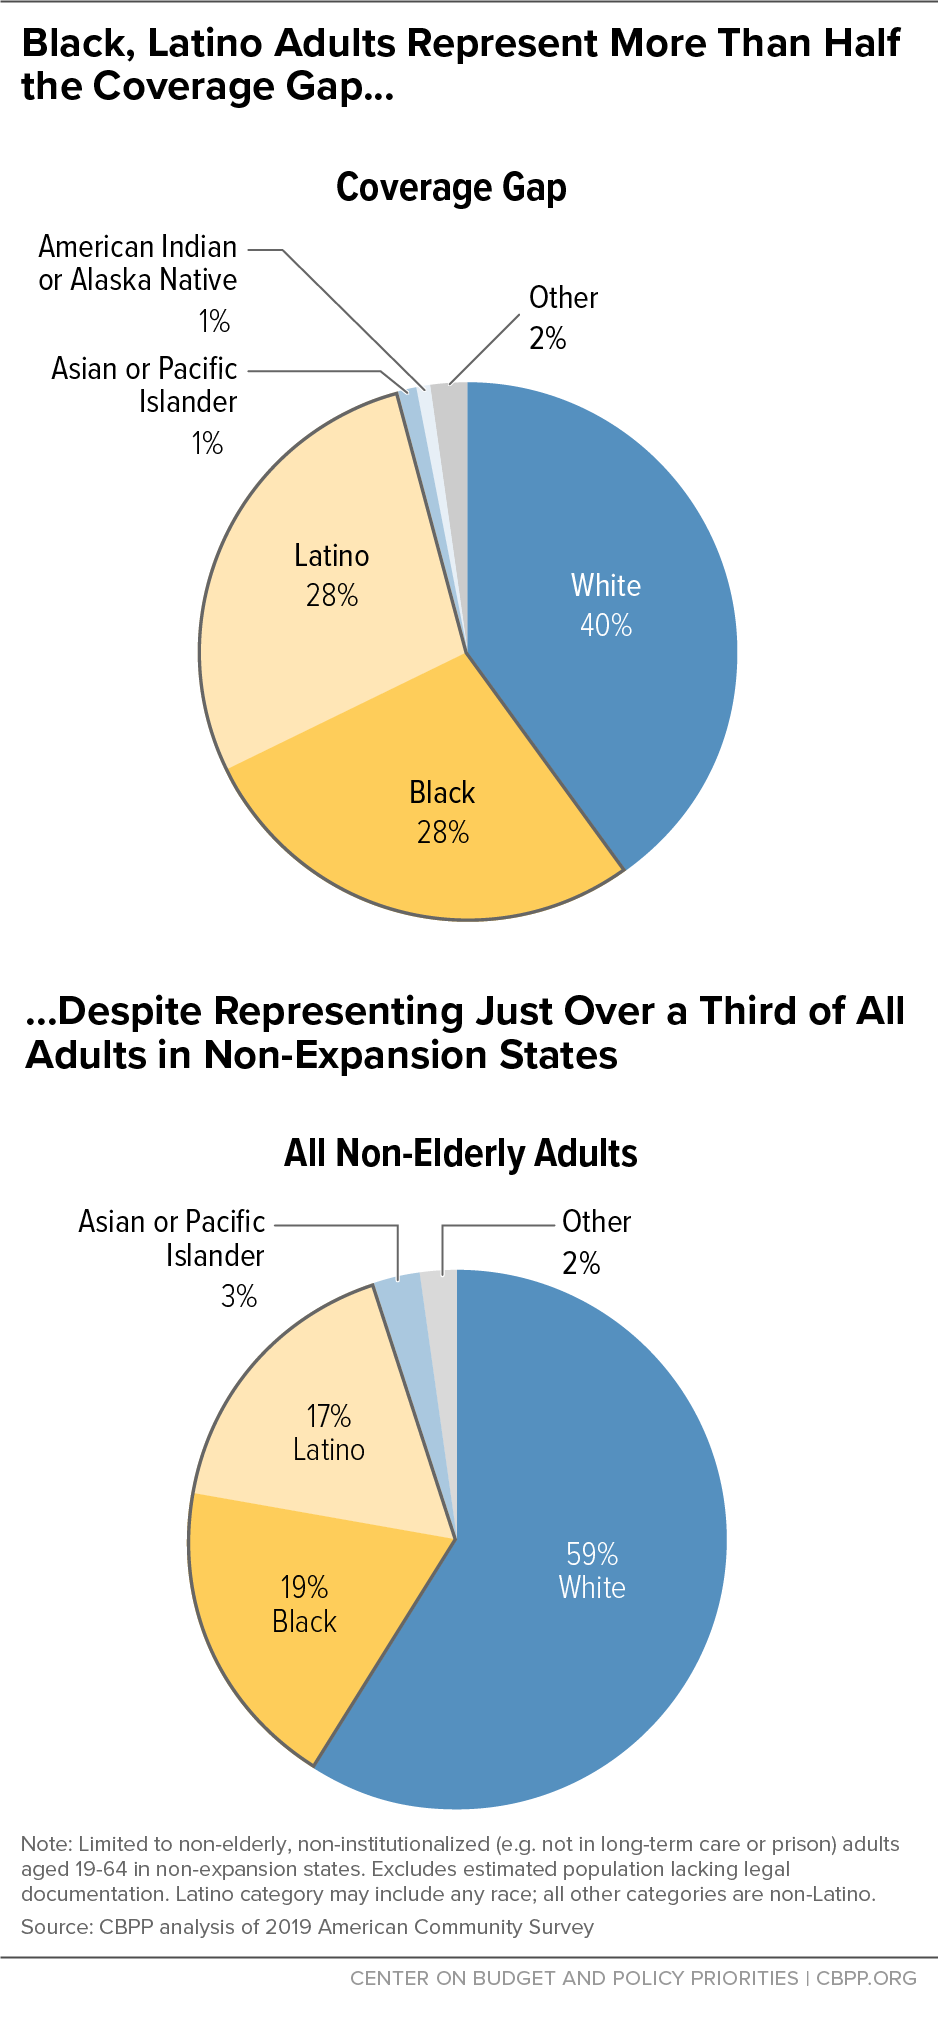 Black, Latino Adults Represent More Than Half the Coverage Gap Despite Representing Just Over a Third of All Adults in Non-Expansion States